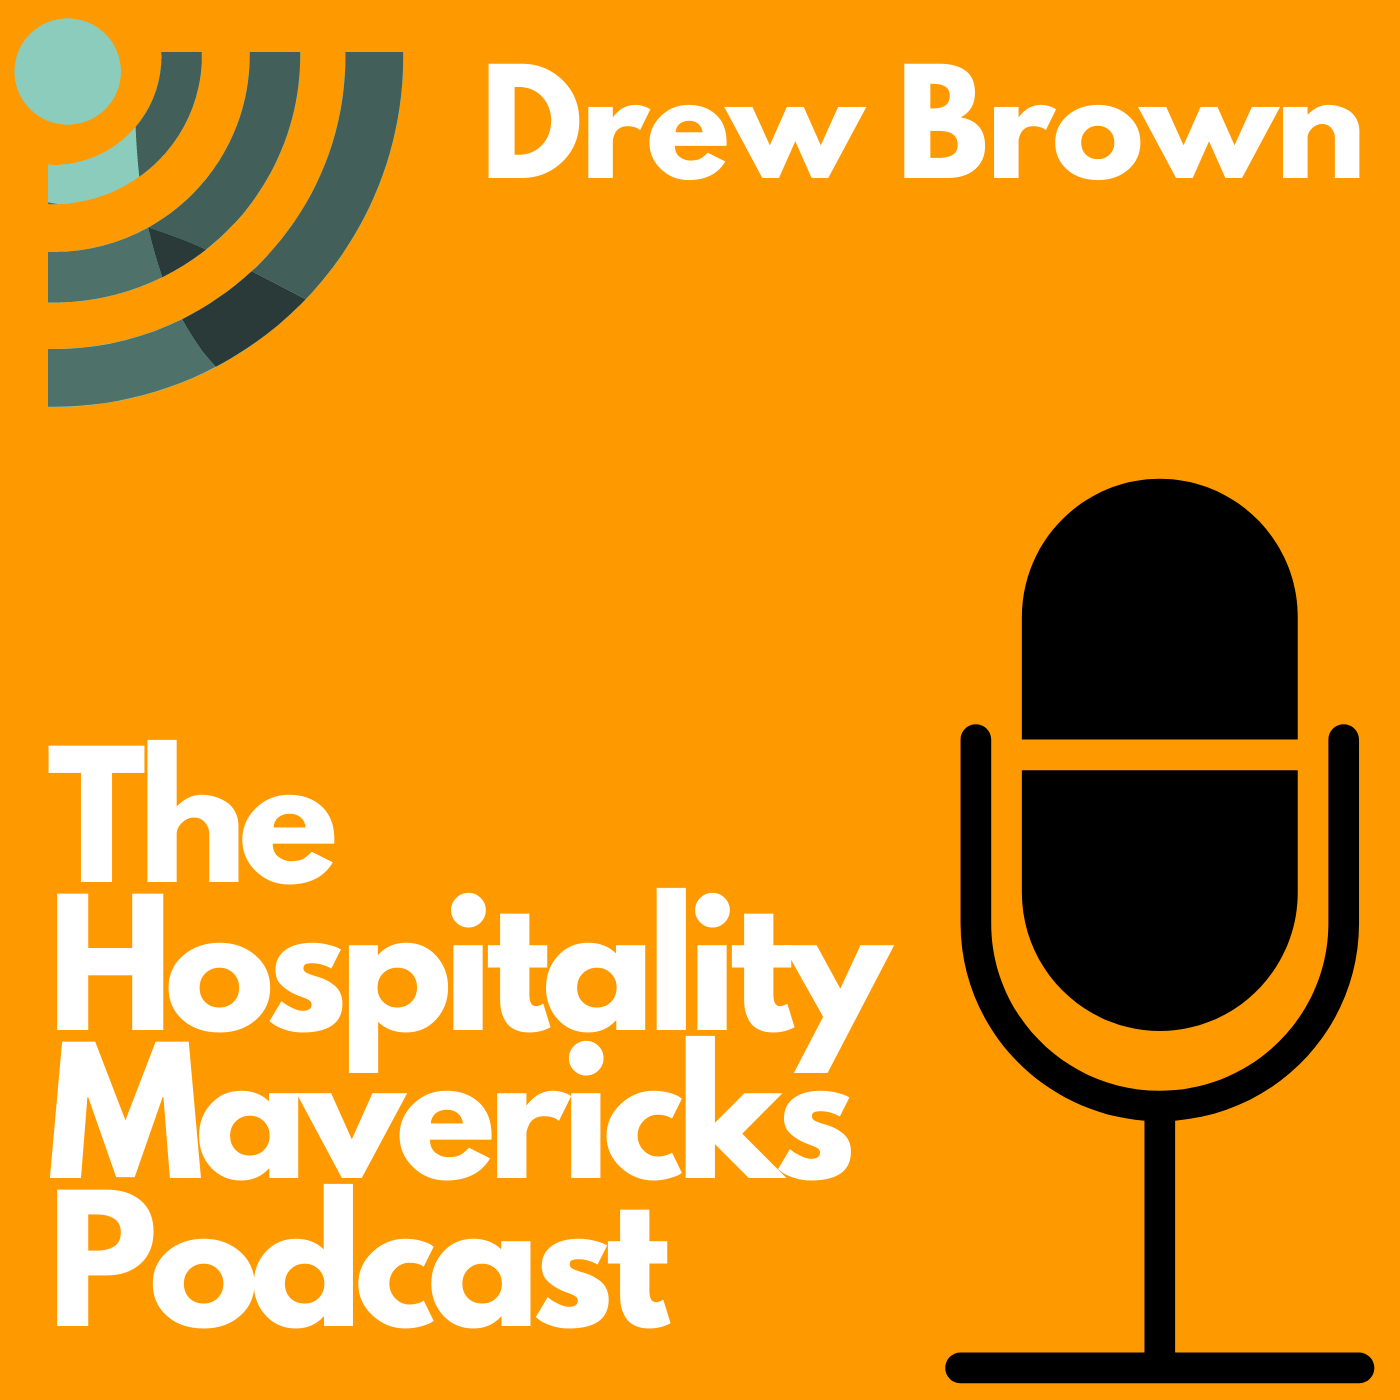 #70 Drew Brown, MD of Dominion Hospitality, on Diversifying Hotels Image